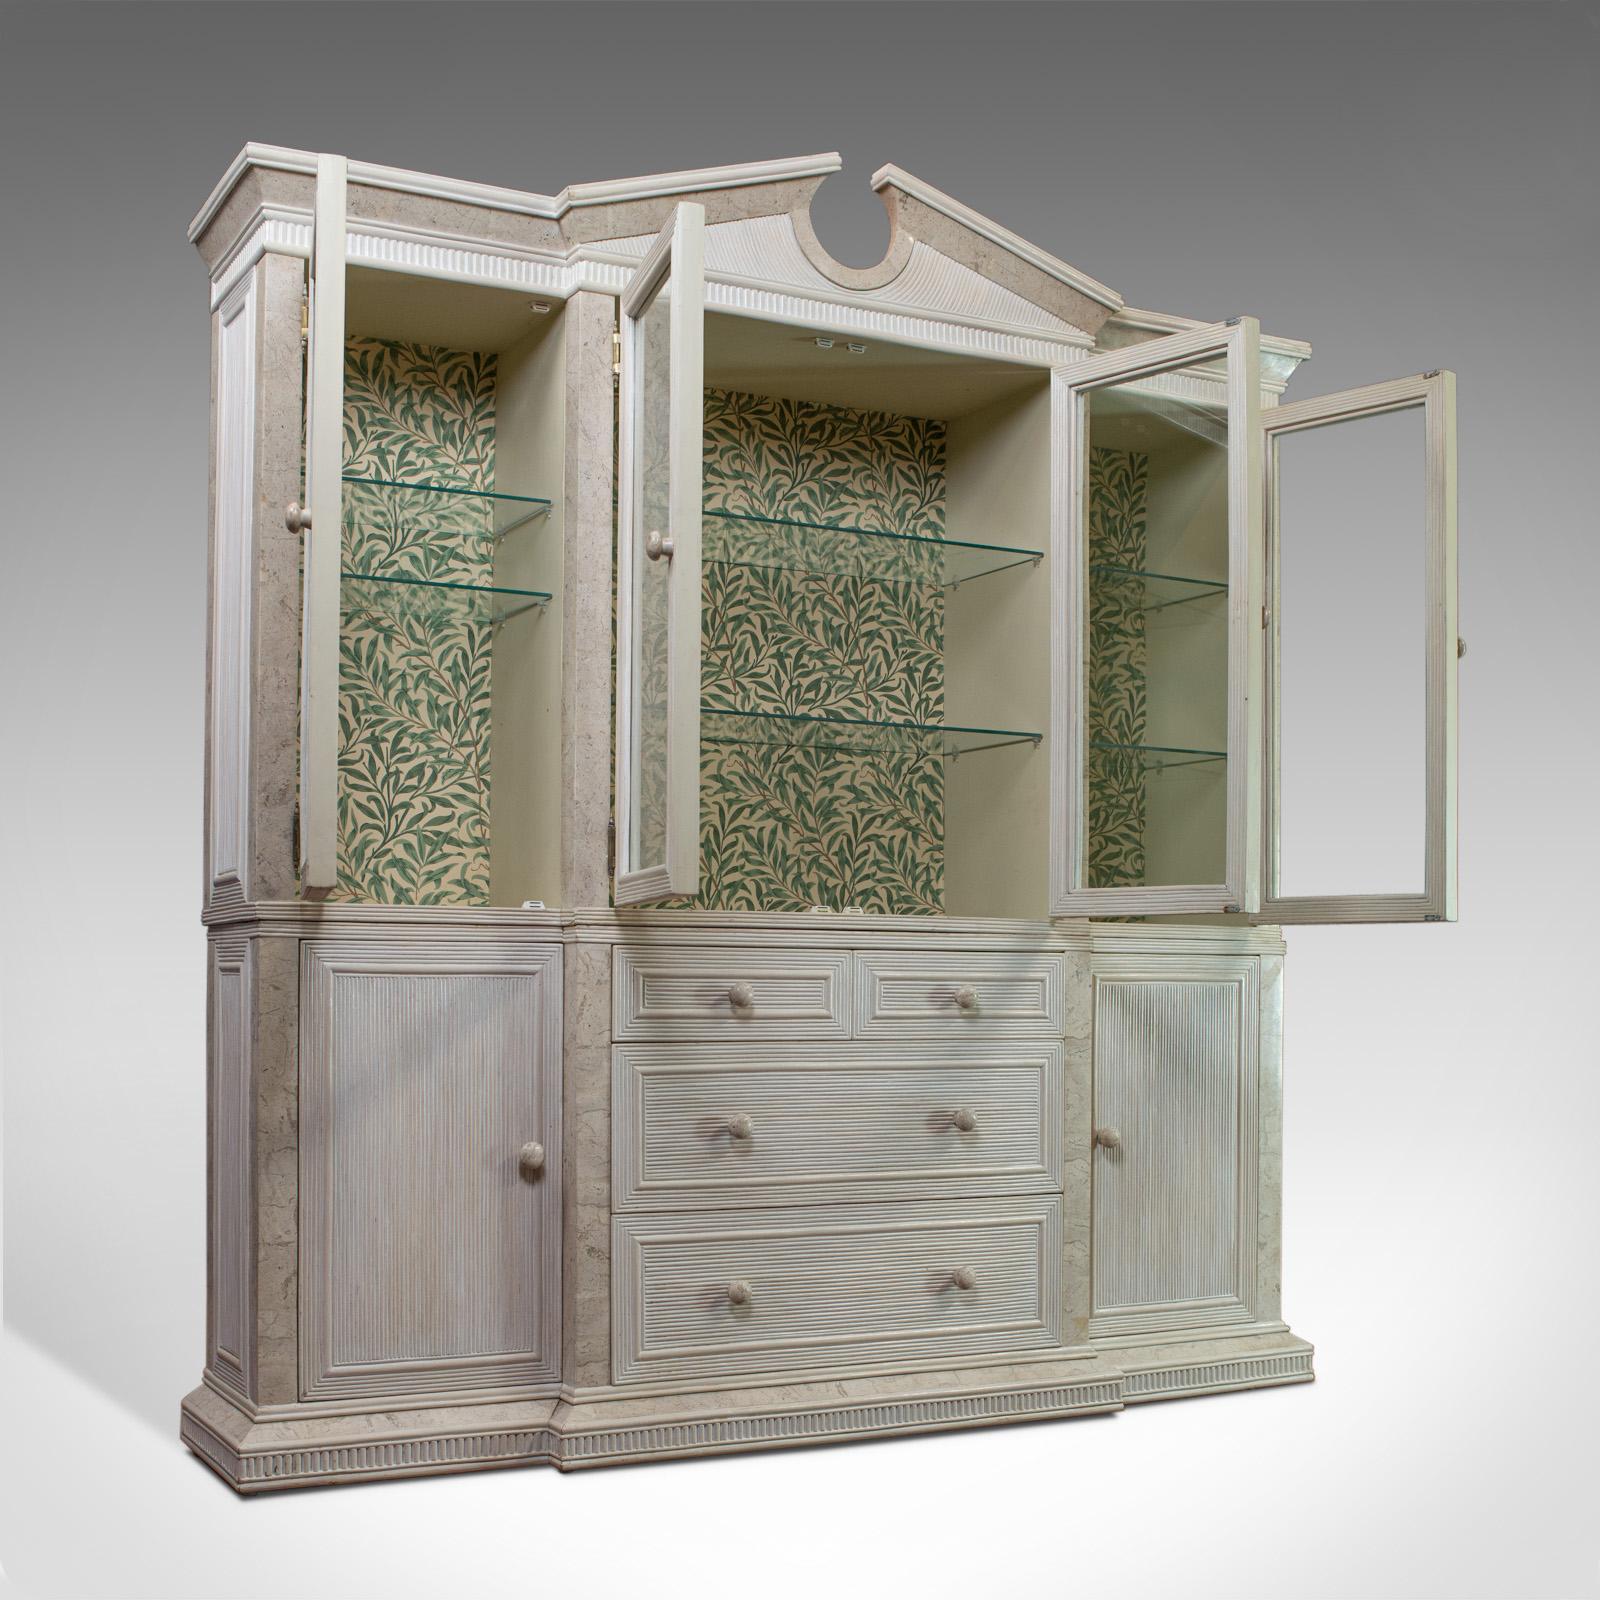 This is a vintage display cabinet. An English, beech and travertine, breakfront cabinet in the classical taste and dating to the late 20th century, circa 1980.

Eye-catching cabinet in generous proportion
Good consistent color